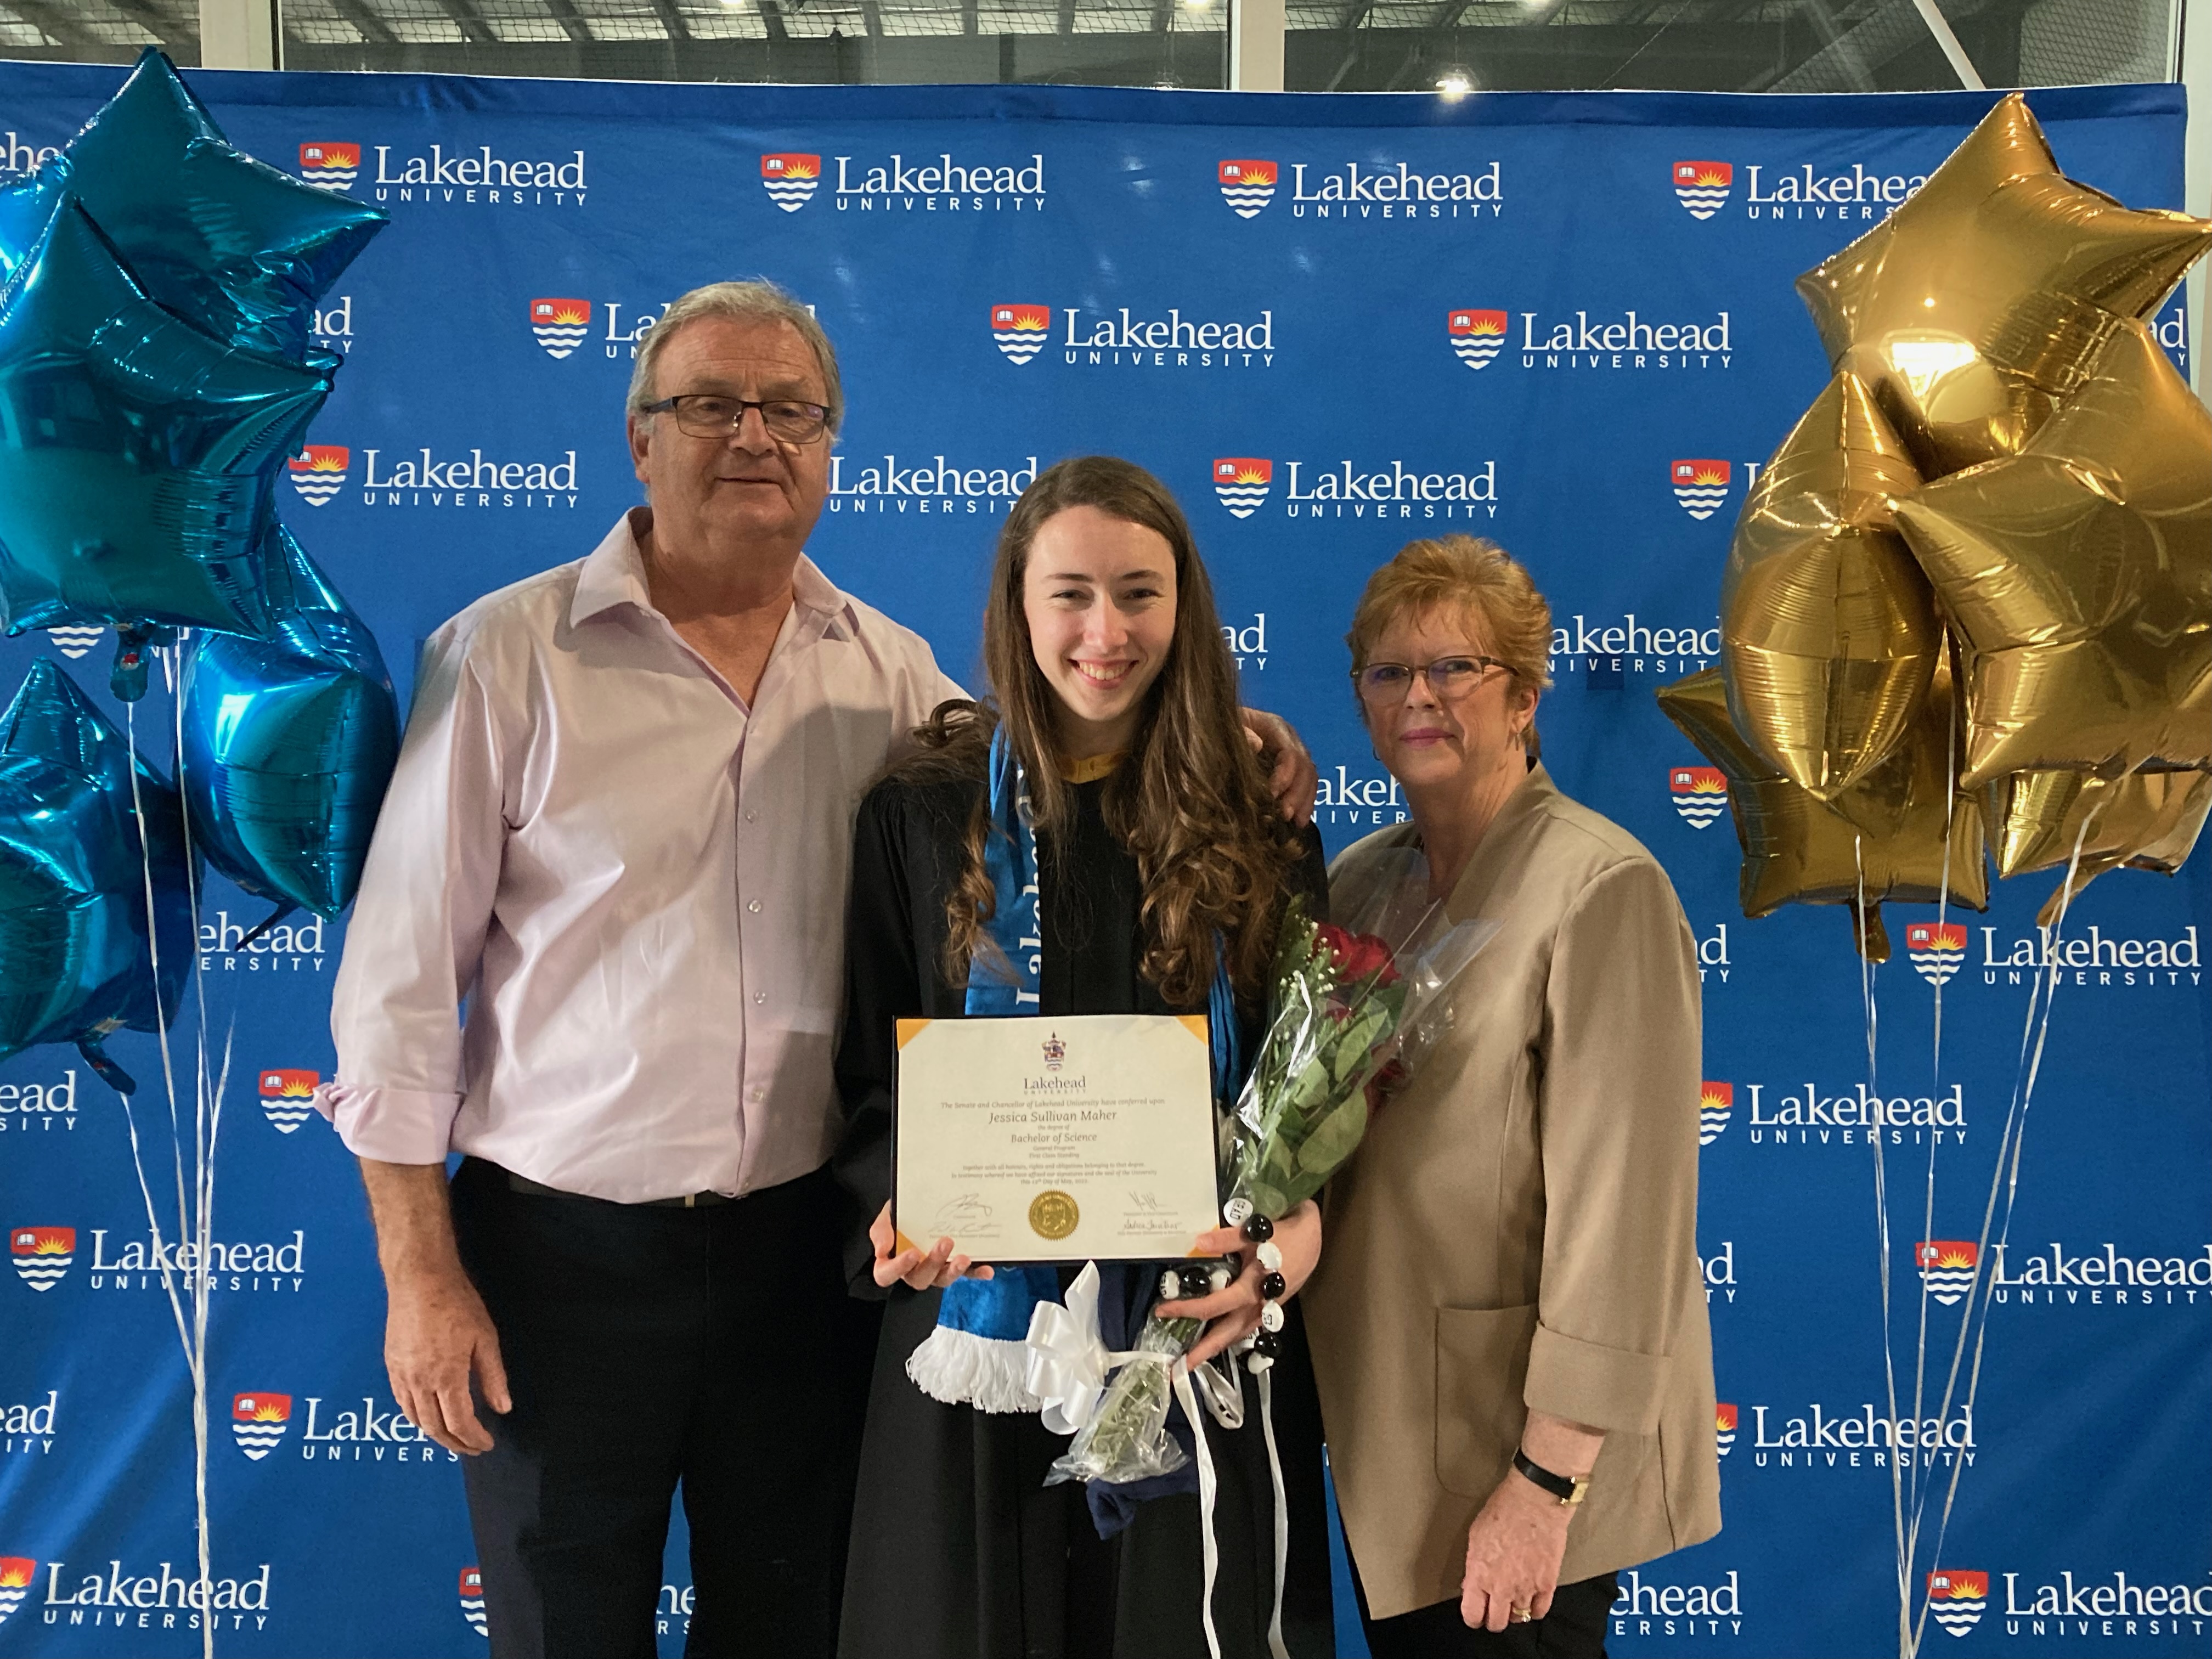 Jessica posing with parents after her Lakehead convocation ceremony